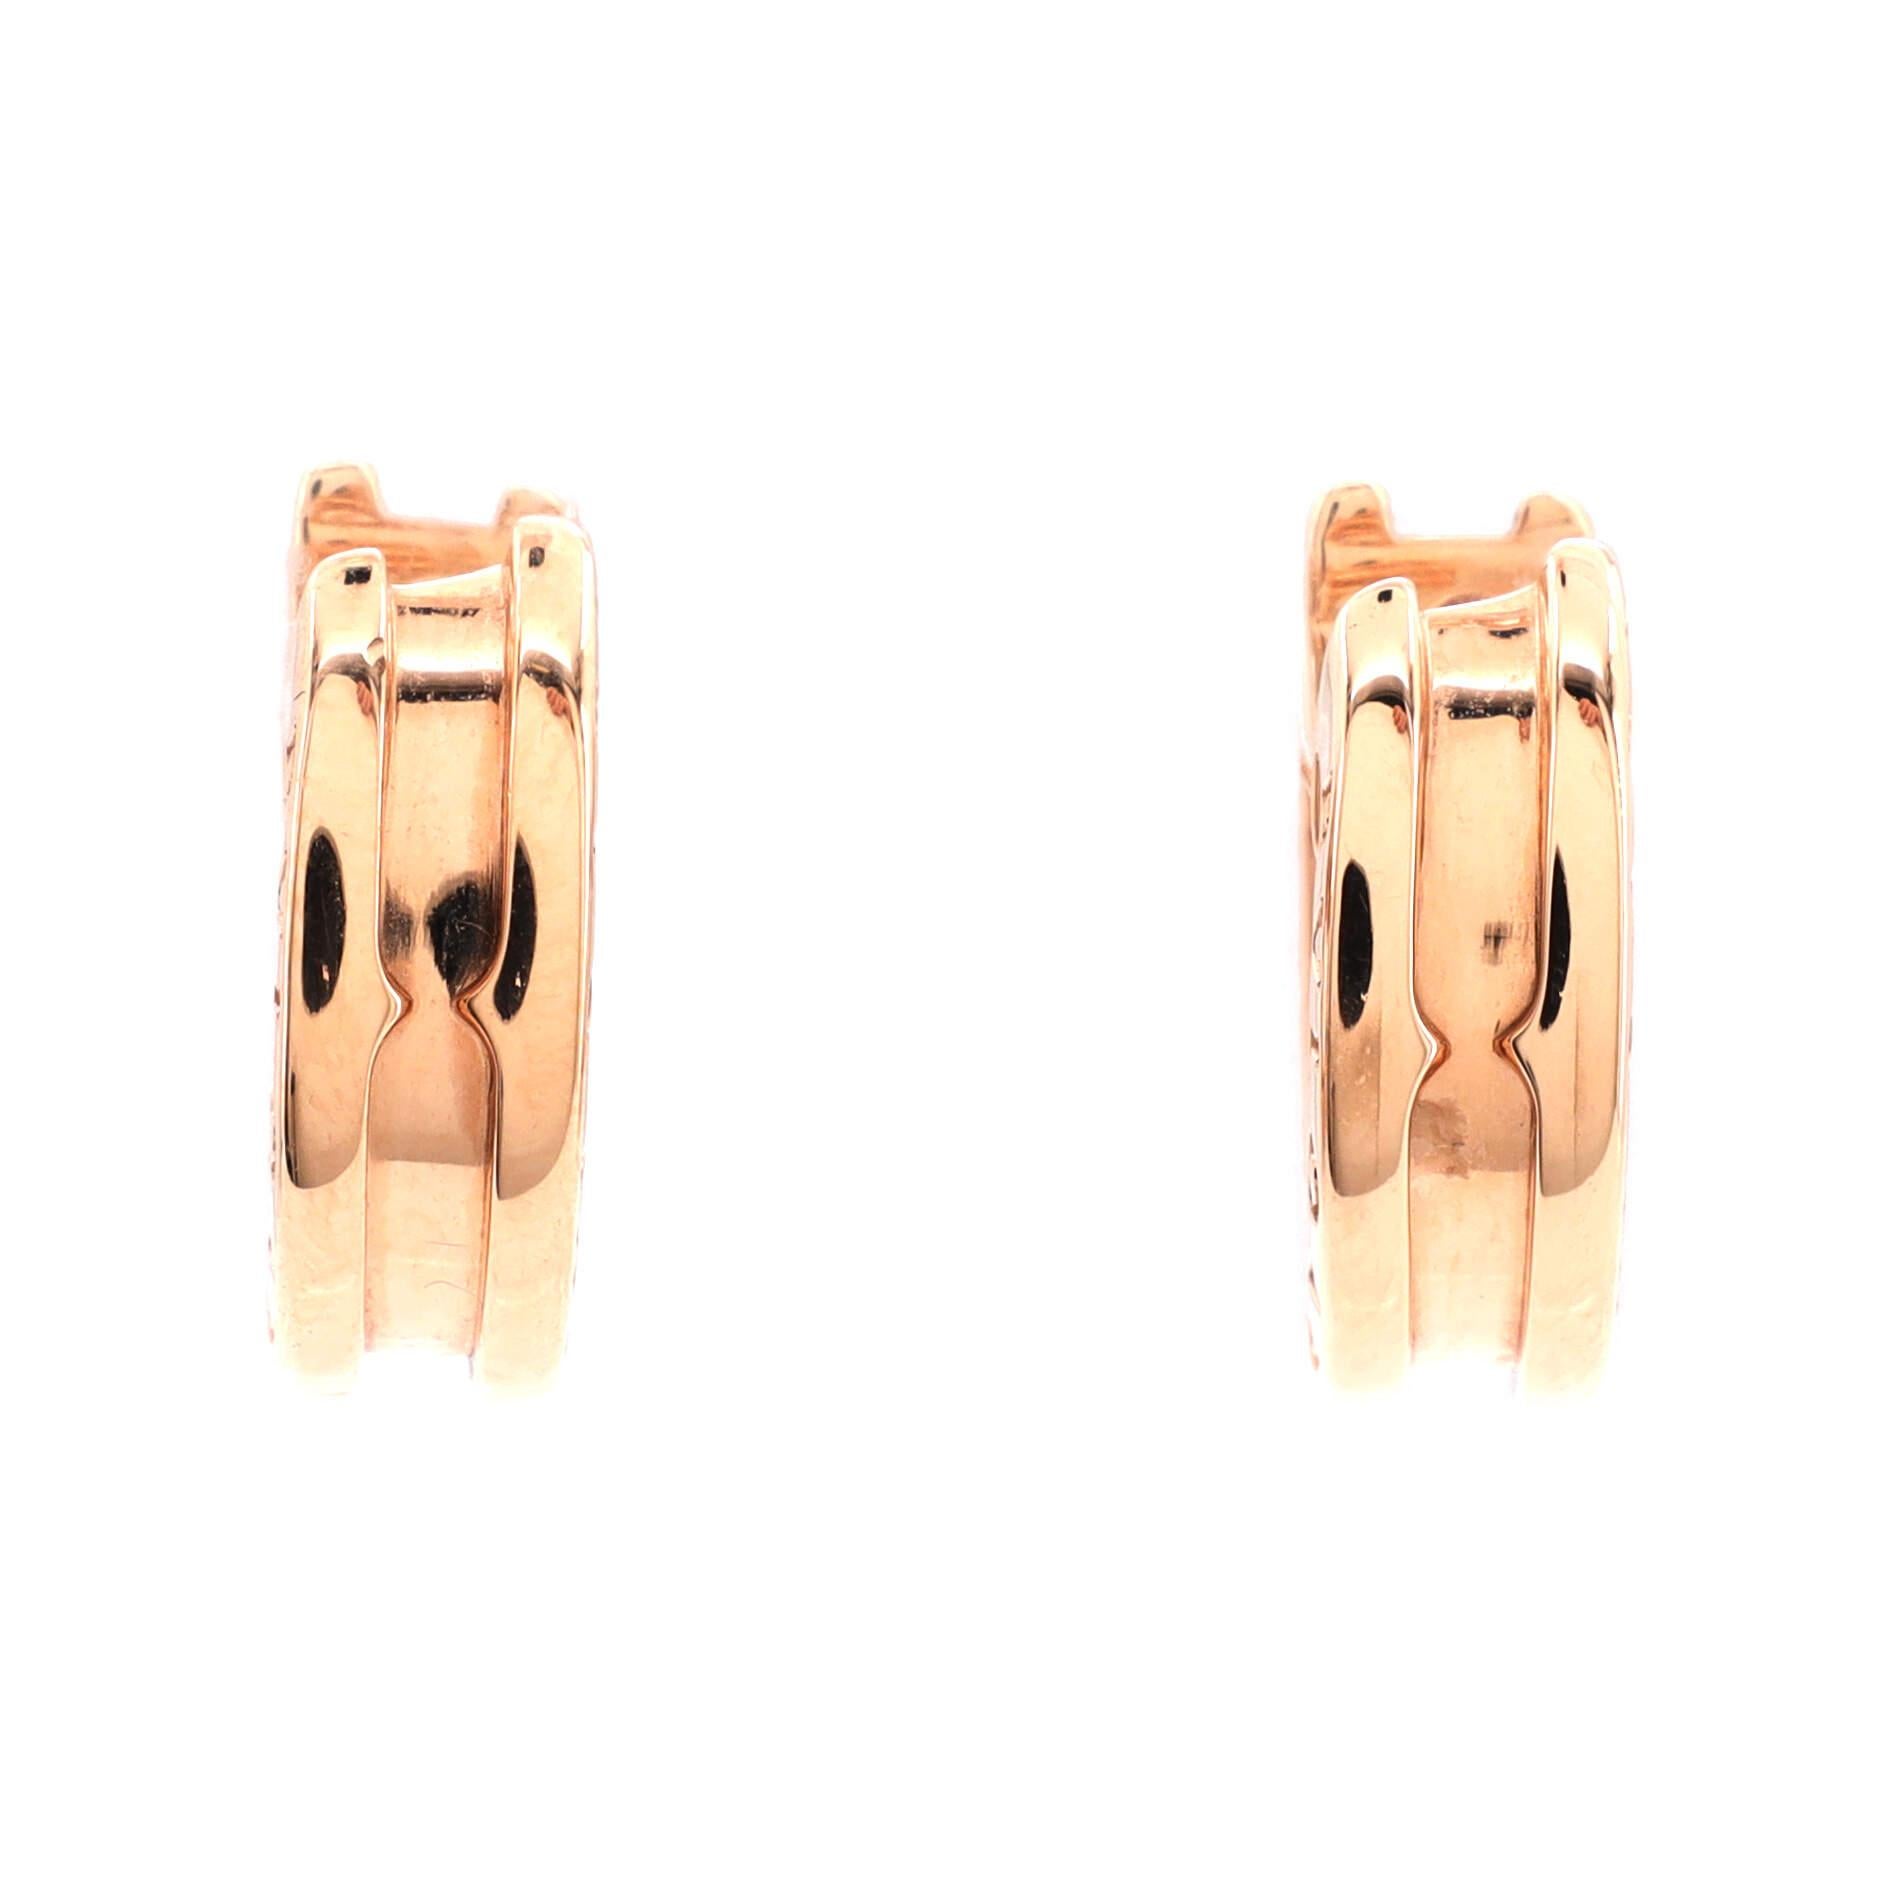 Condition: Very good. Moderate wear throughout.
Accessories: No Accessories
Measurements: Height/Length: 14.65 mm, Width: 4.85 mm
Designer: Bvlgari
Model: B.Zero1 Hoop Earrings 18K Rose Gold
Exterior Color: Rose Gold
Item Number: 199862/314